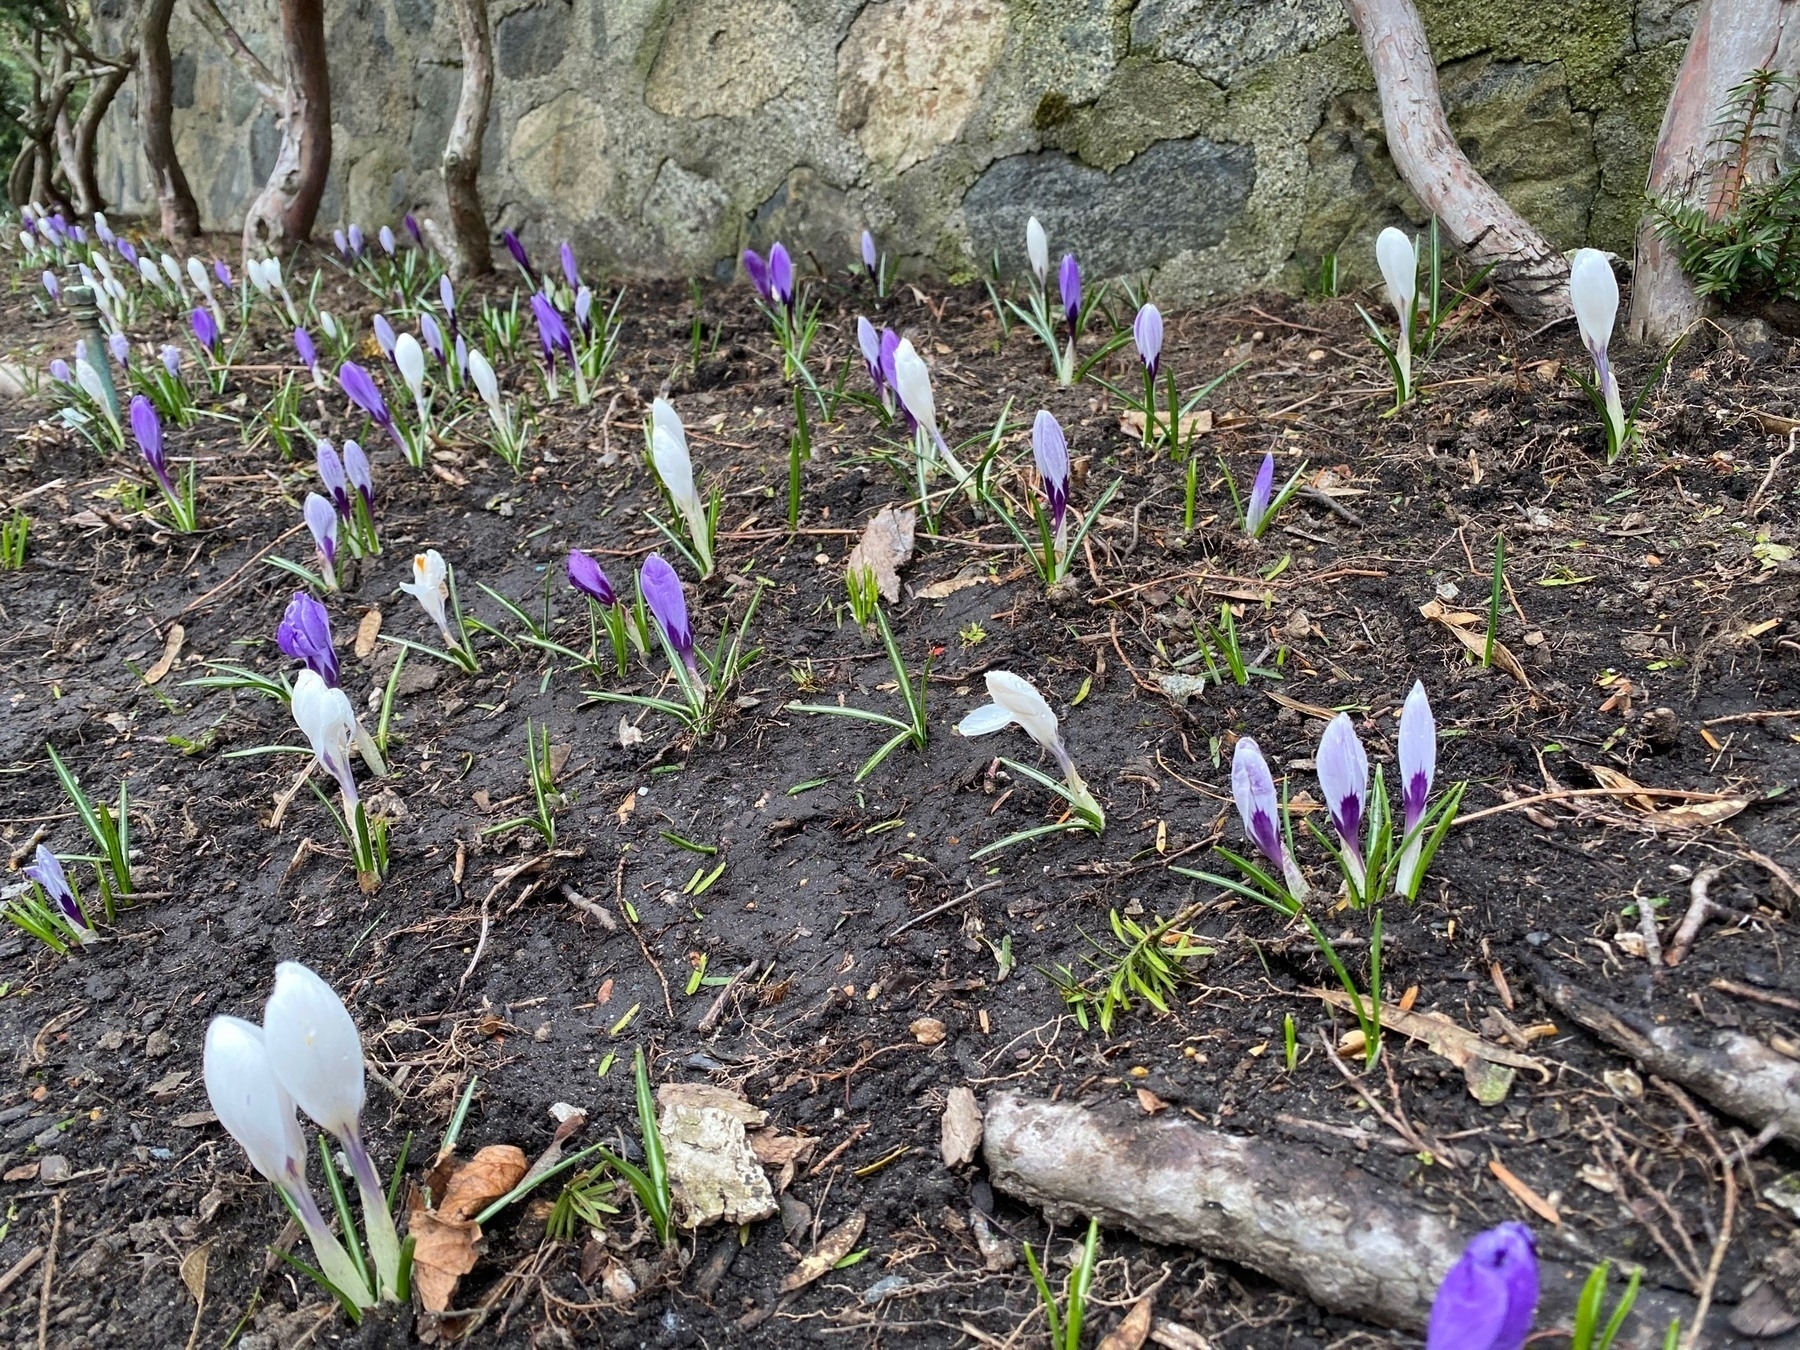 White and purple furled crocuses in the damp ground.